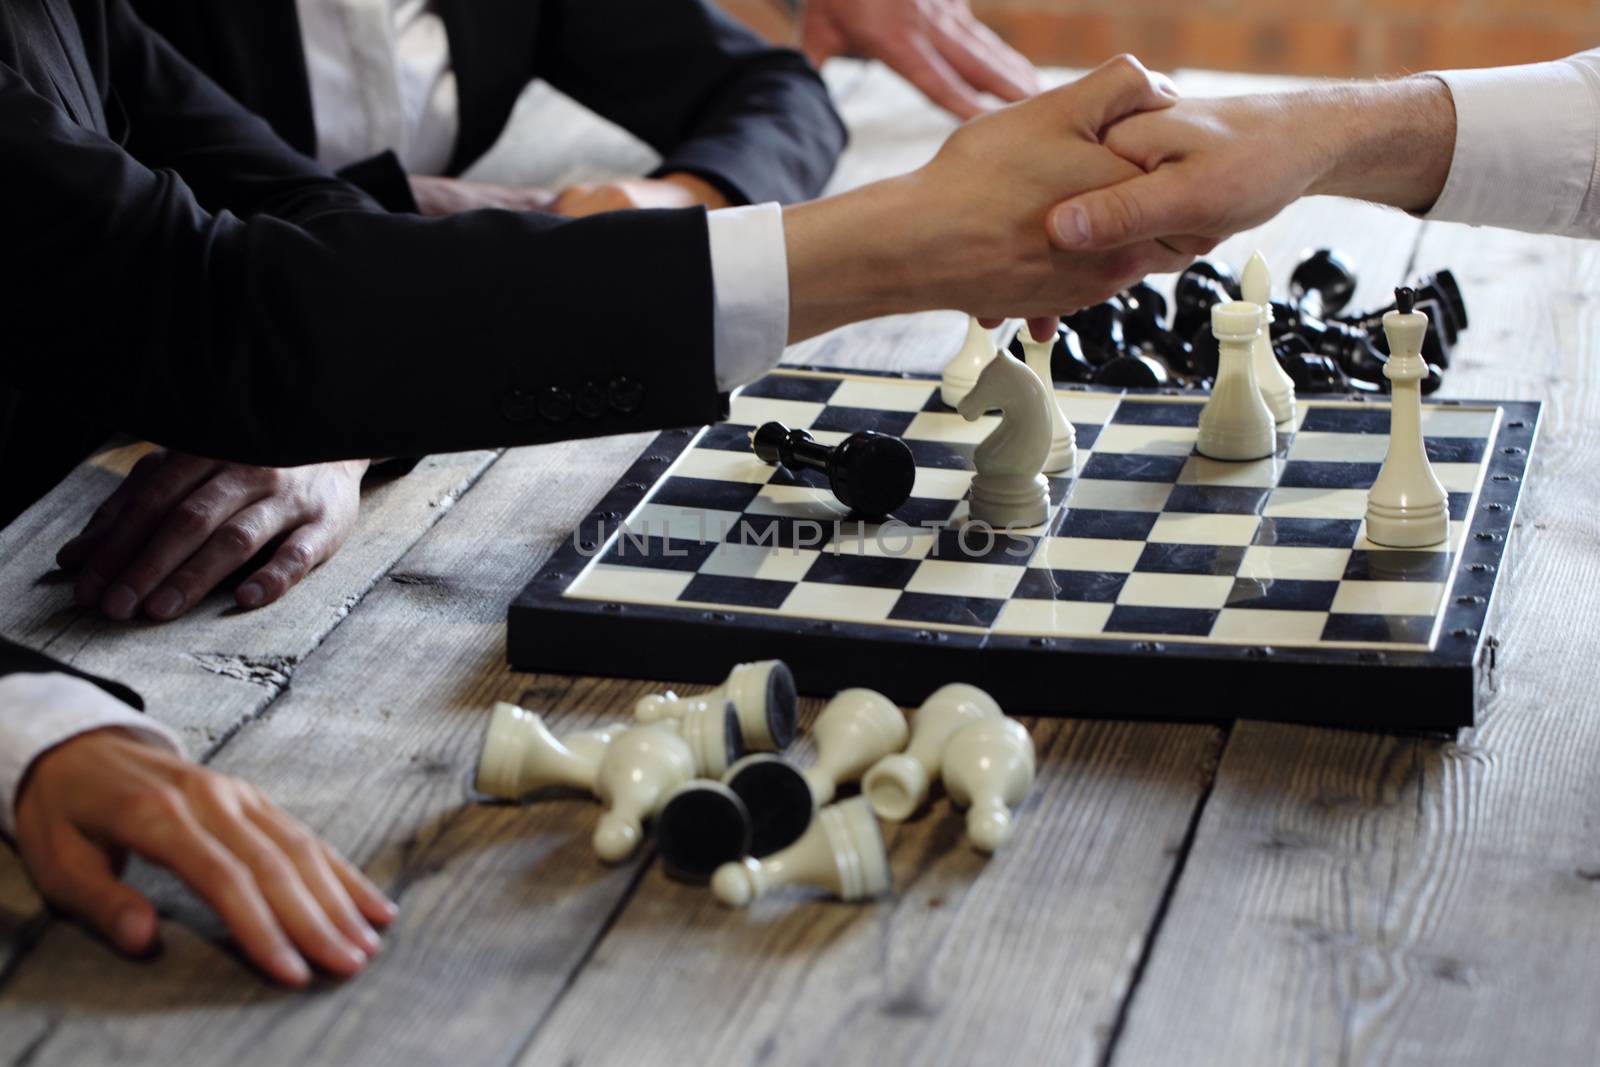 Business people shaking hands over chessboard after the game